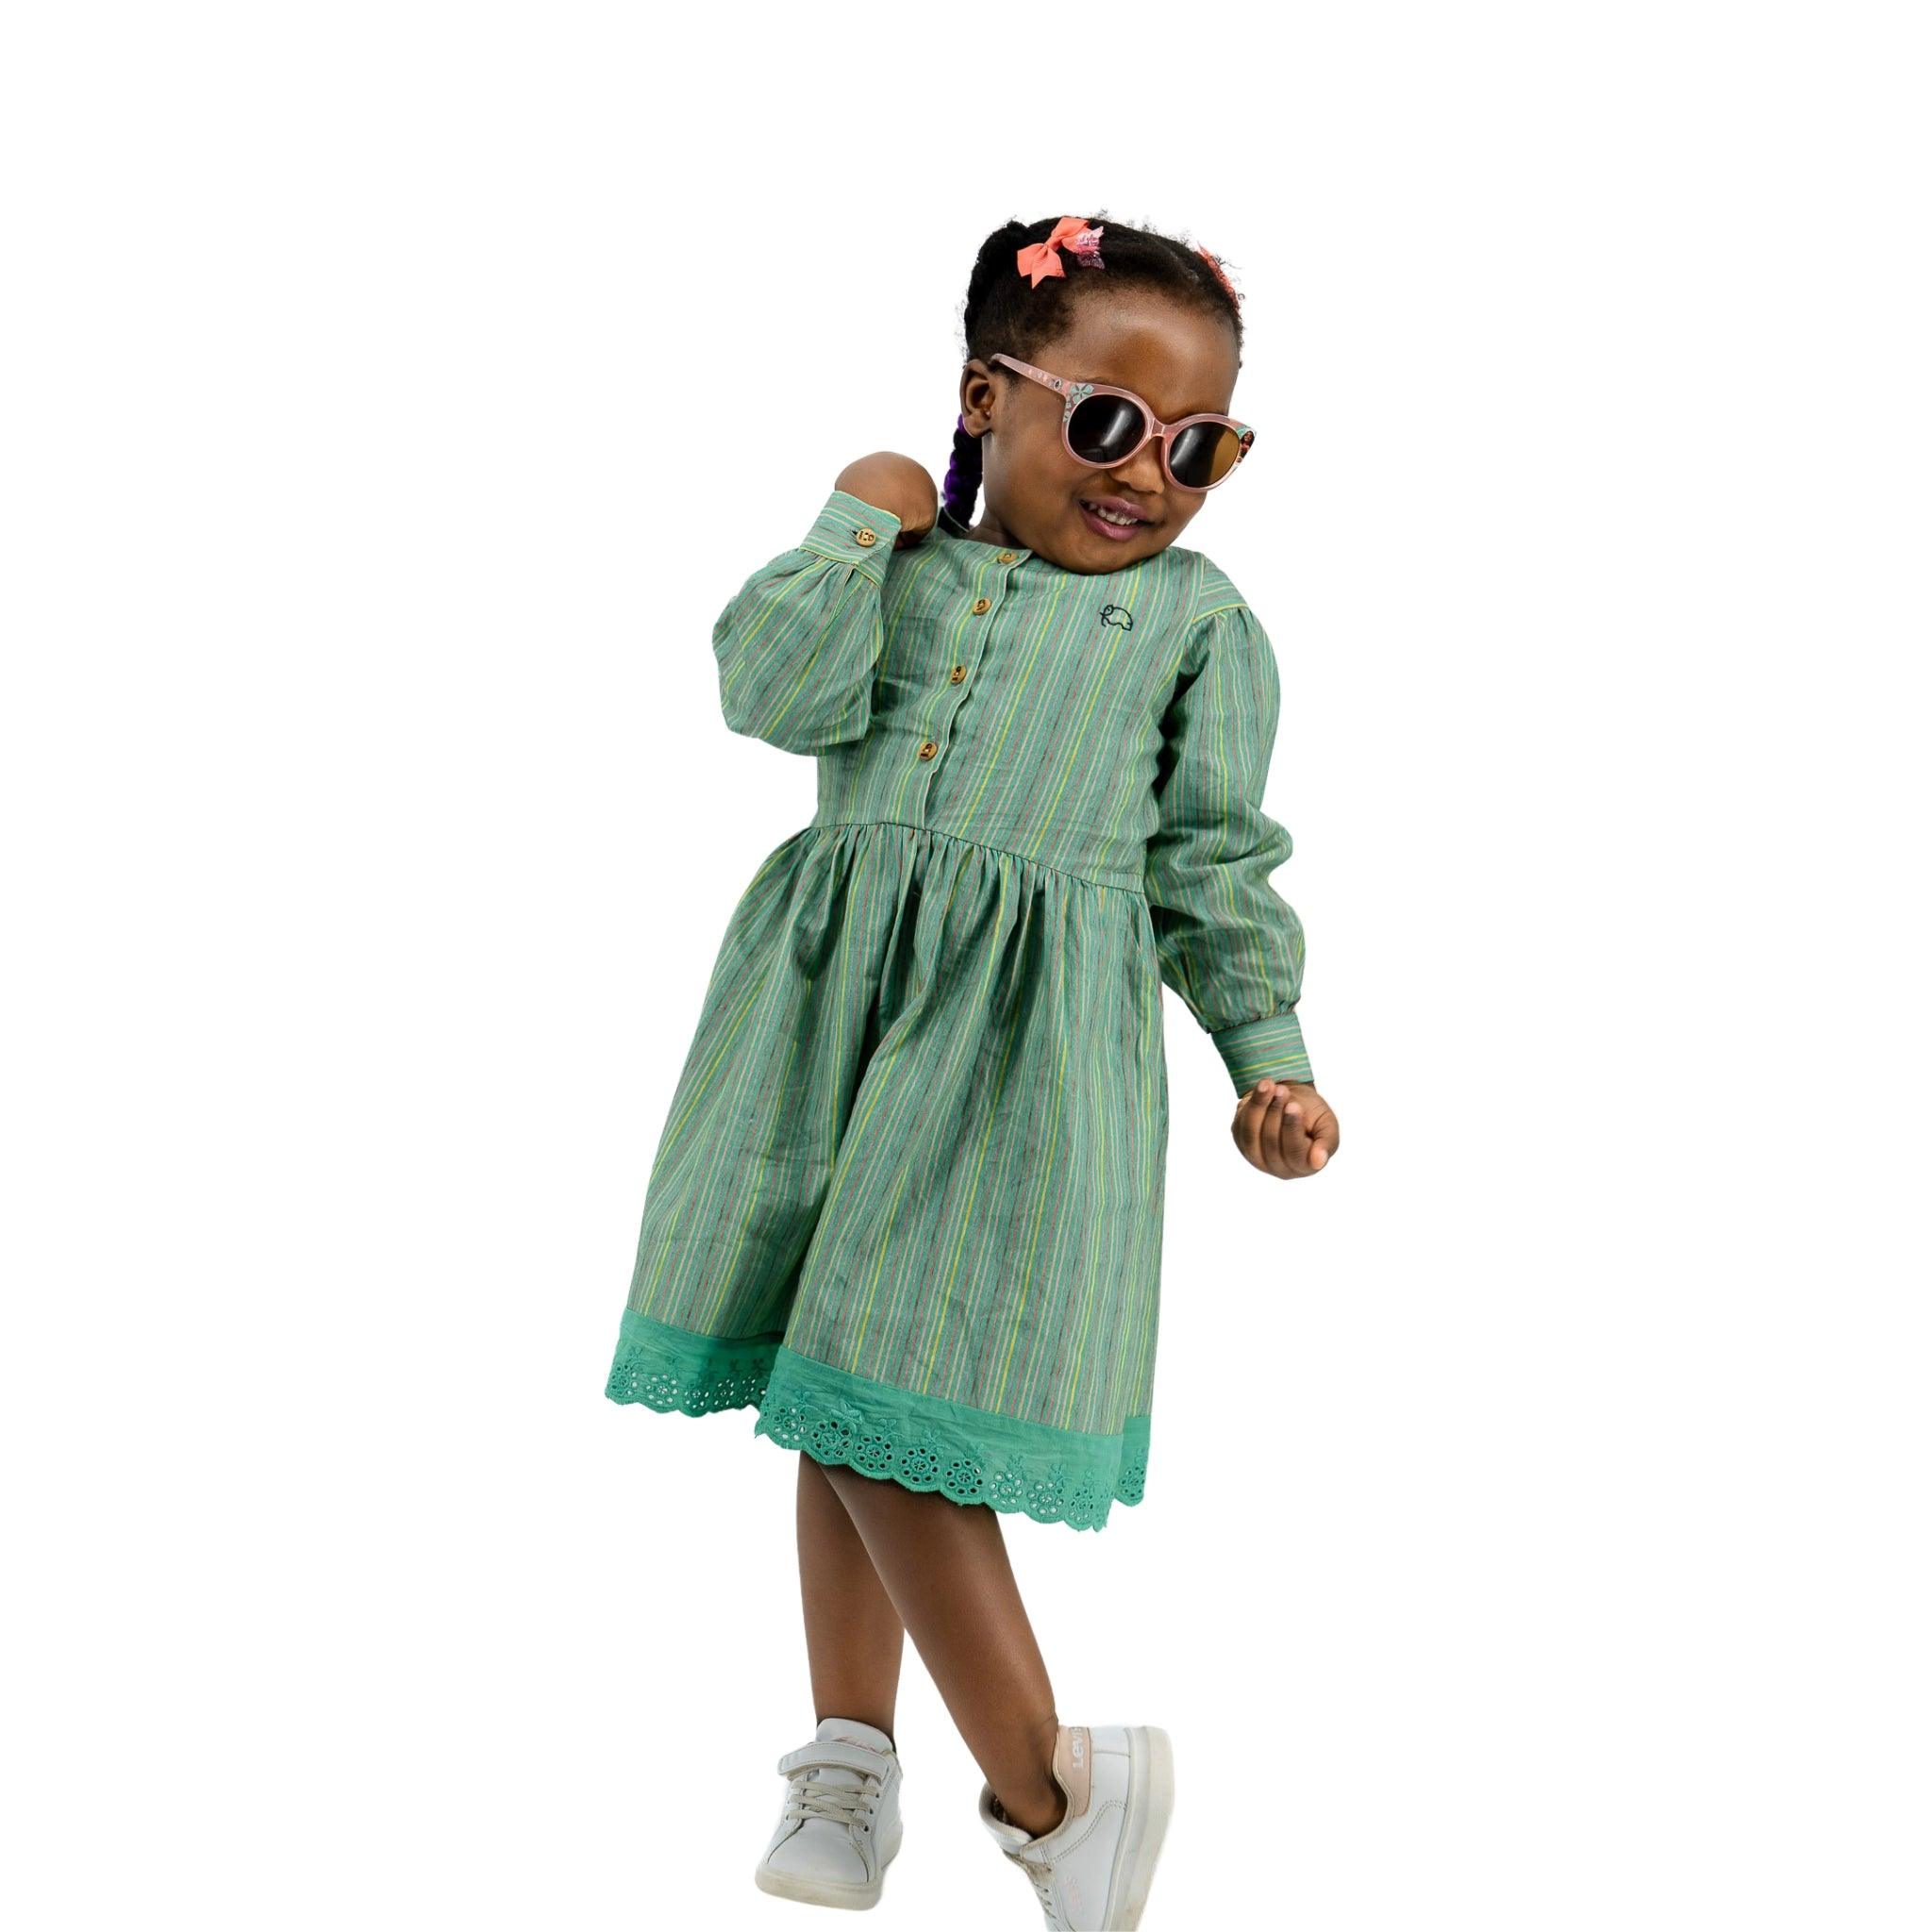 A young girl in a Karee Green Striped Long Puff Sleeve Cotton Dress and white sneakers posing playfully with sunglasses and a red hair clip, isolated on a white background.